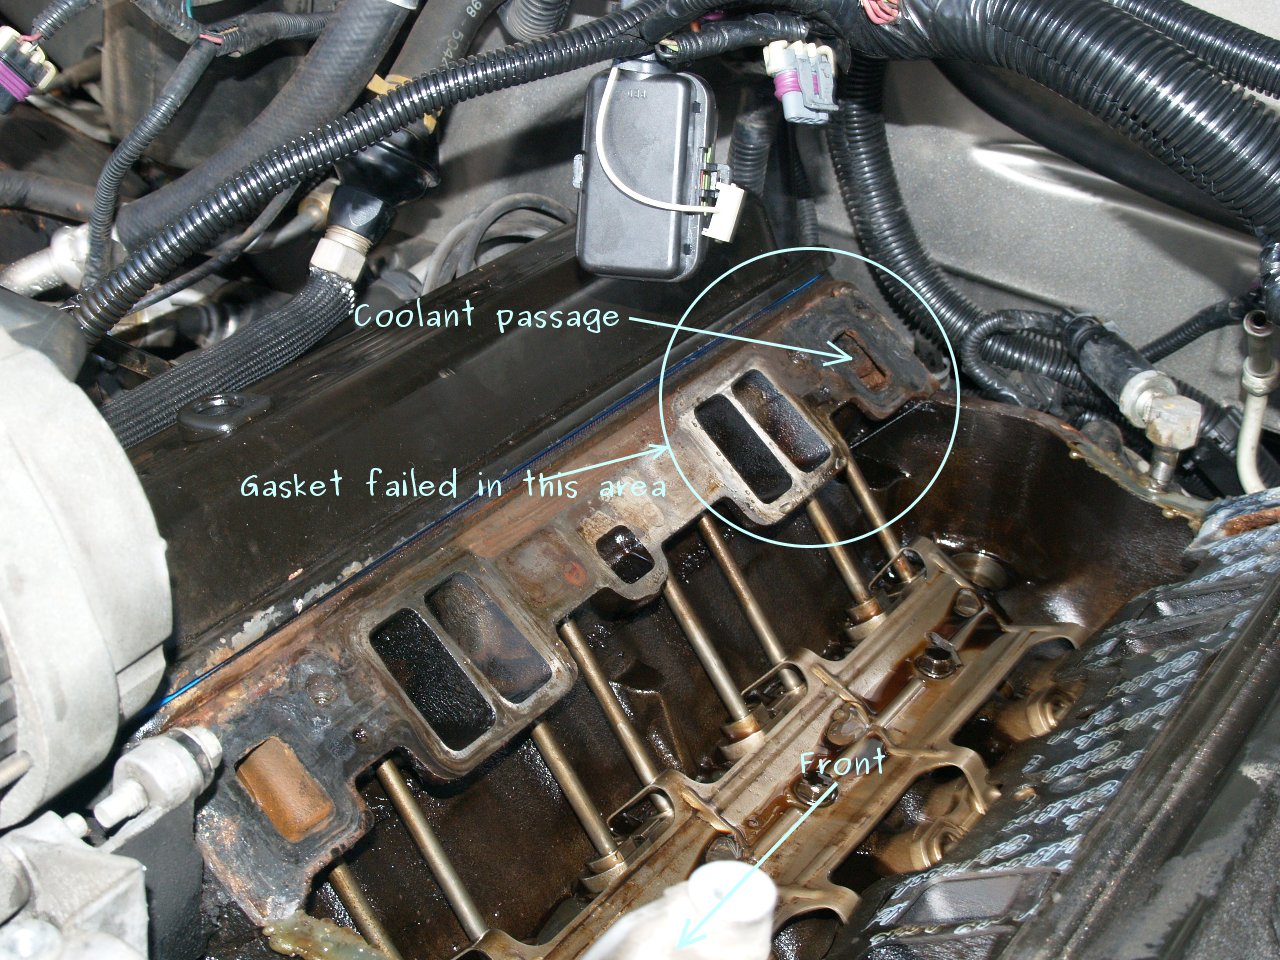 See P3060 in engine